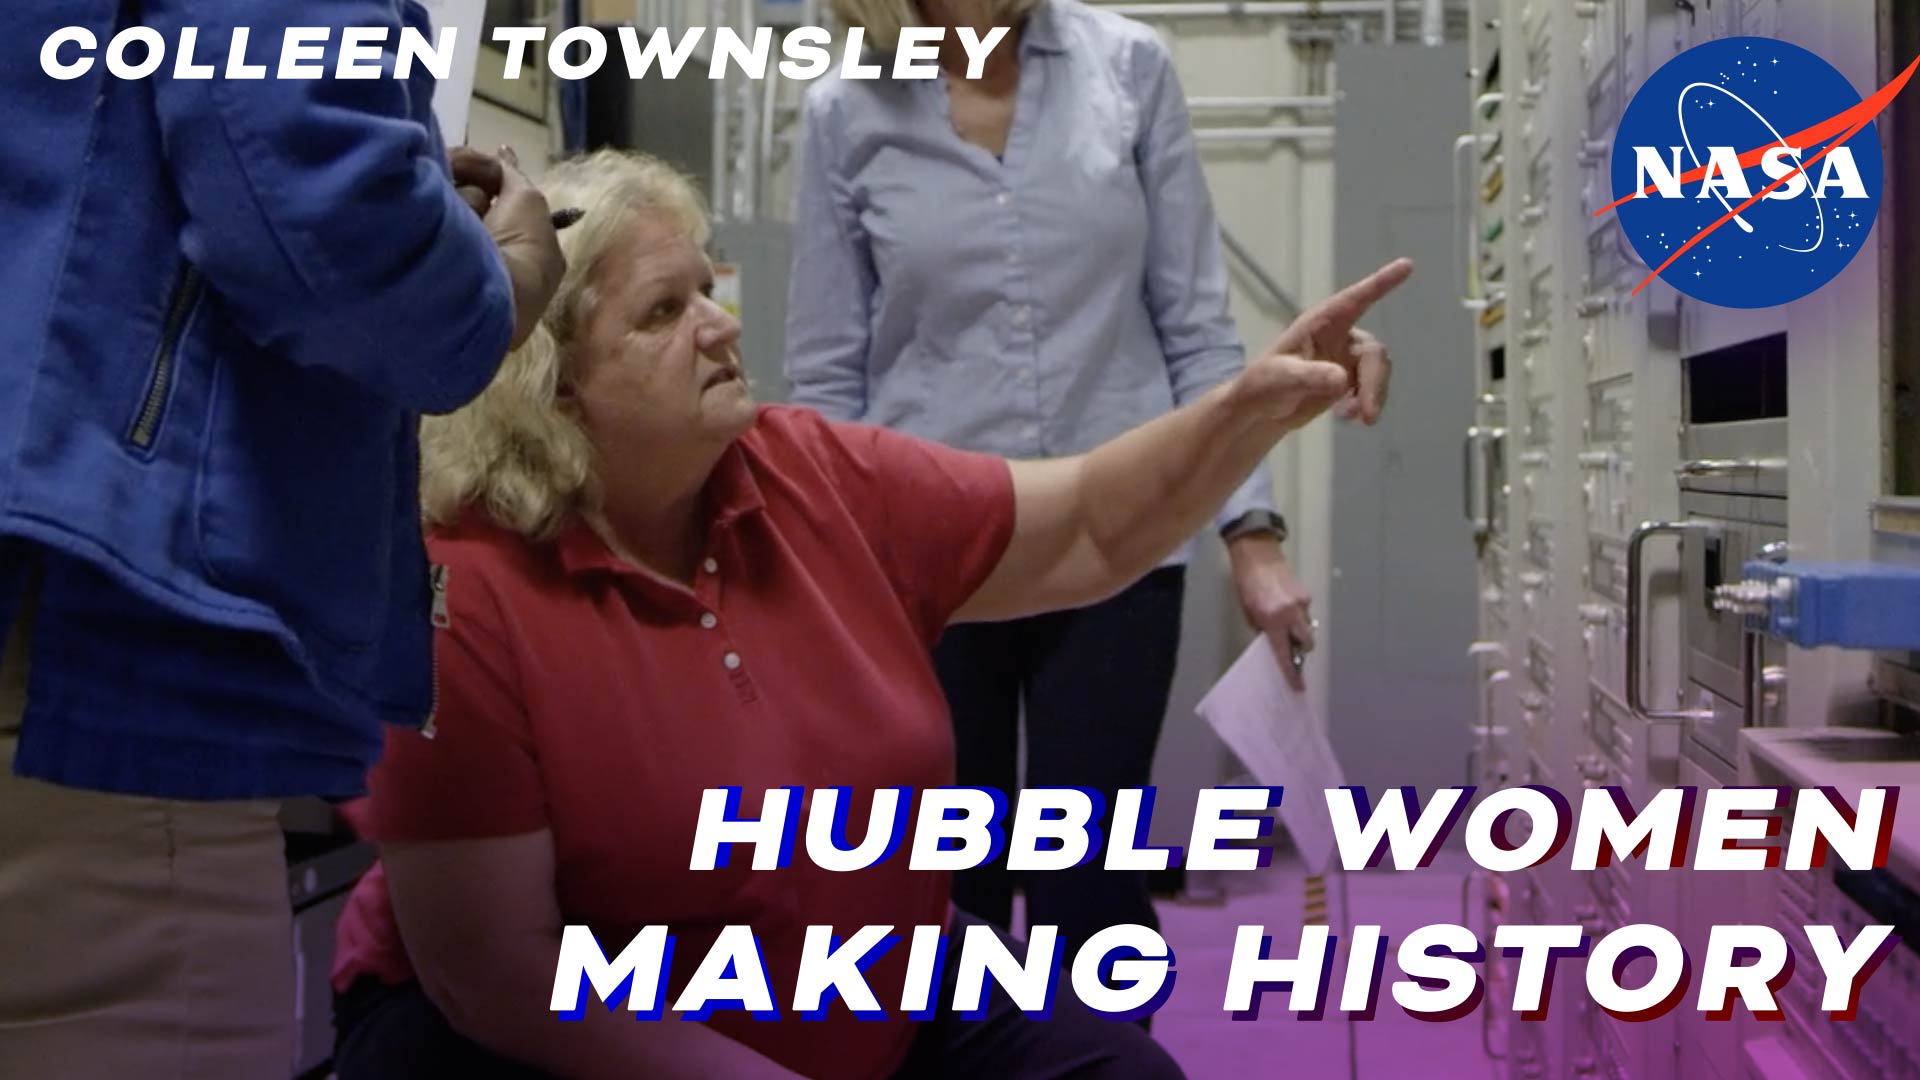 Preview Image for Hubble Women Making History: Colleen Townsley